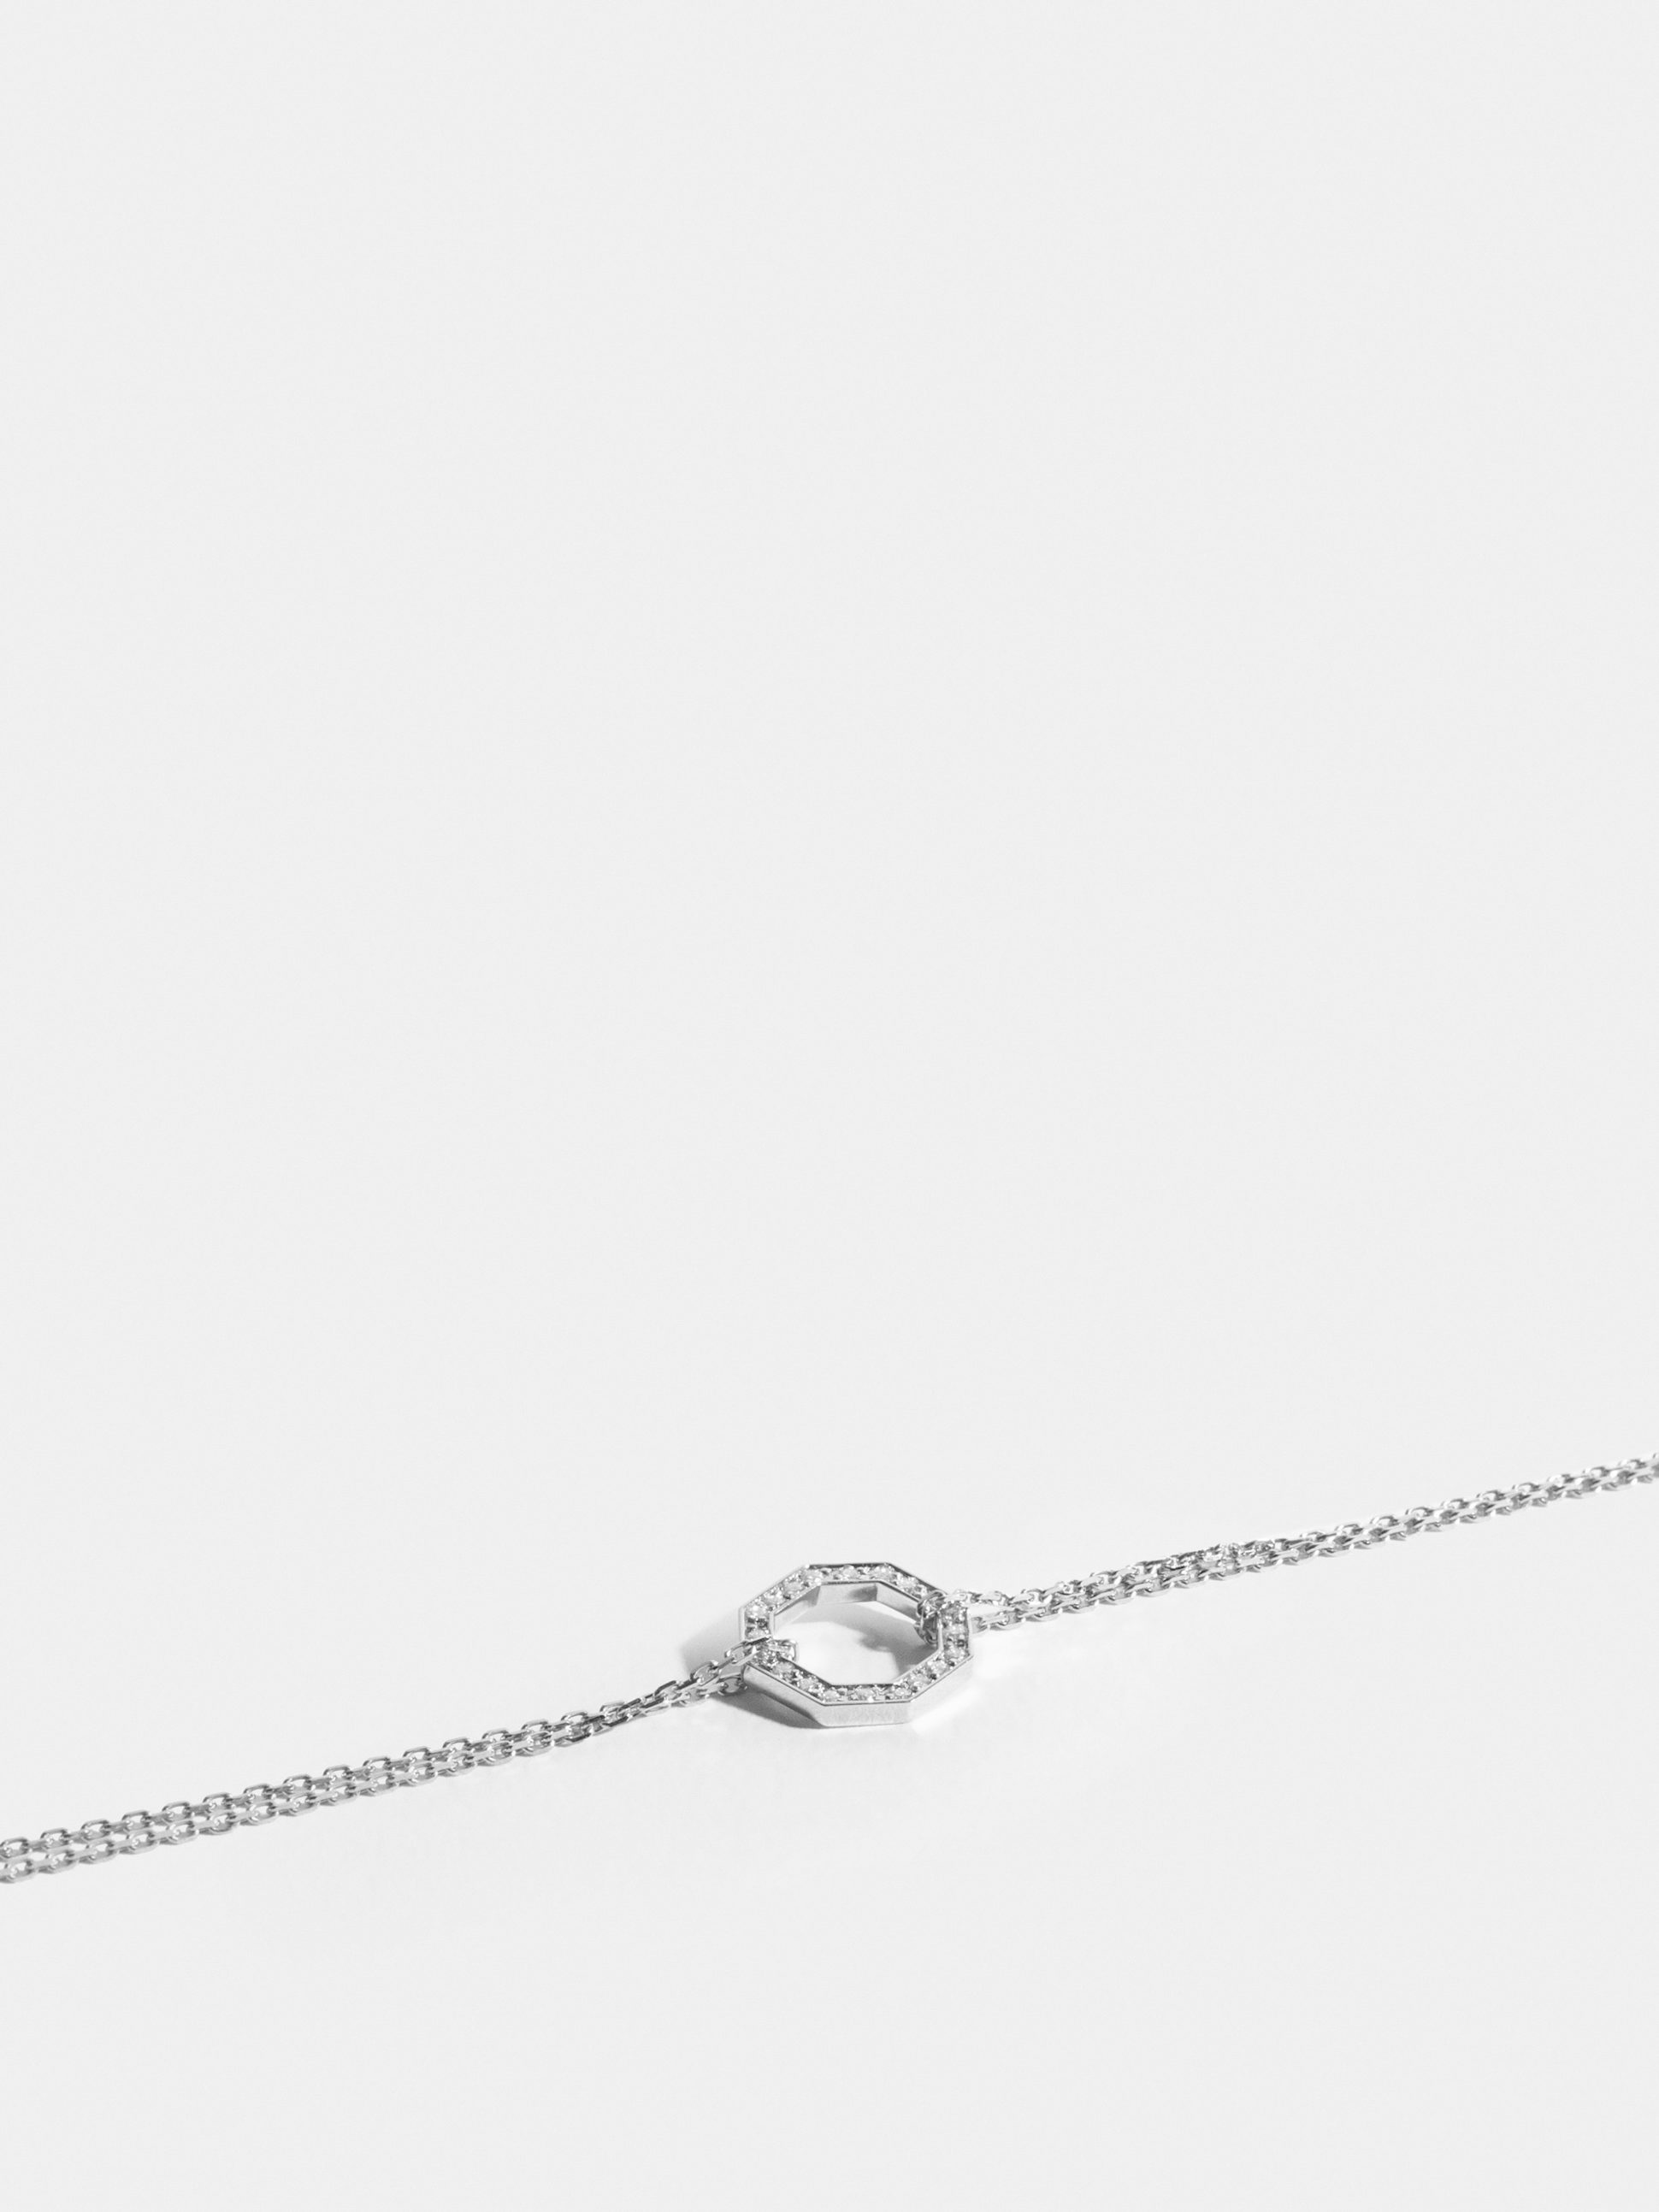 Octogone motif in 18k Fairmined ethical white gold, paved with lab-grown diamonds, on a chain.